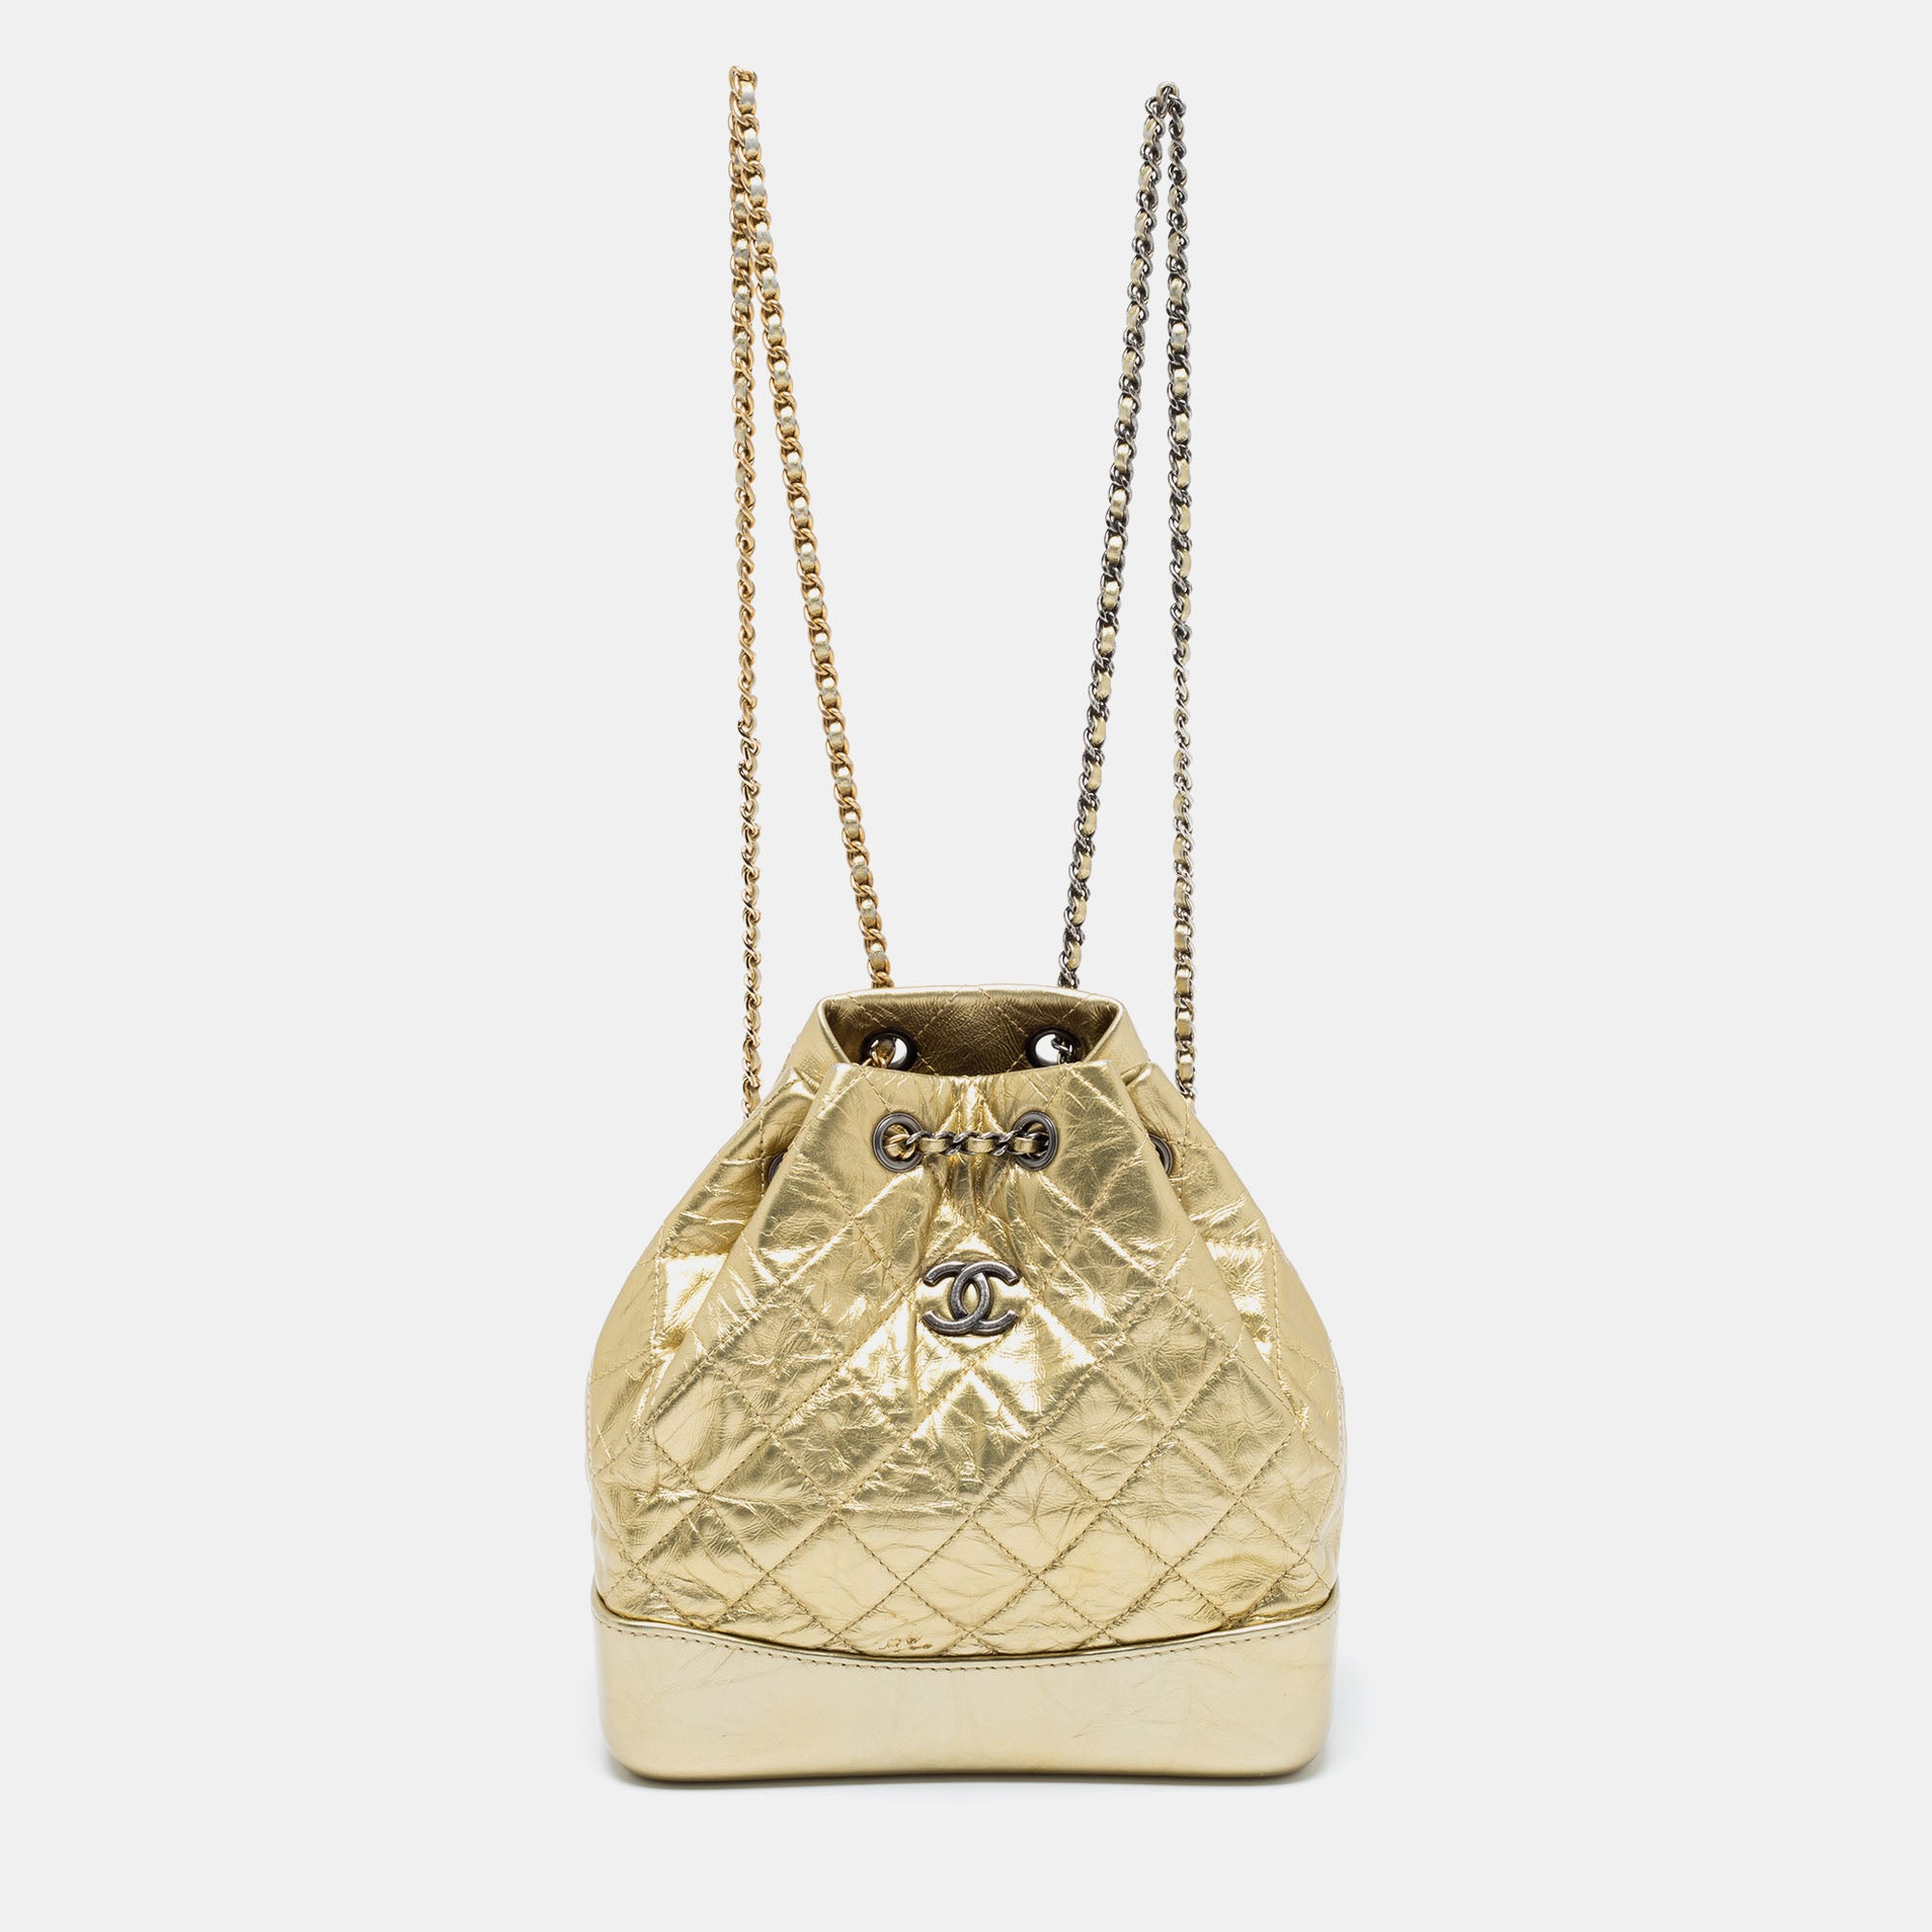 Chanel Metallic Gold Quilted Laminated Leather Small Gabrielle Backpac